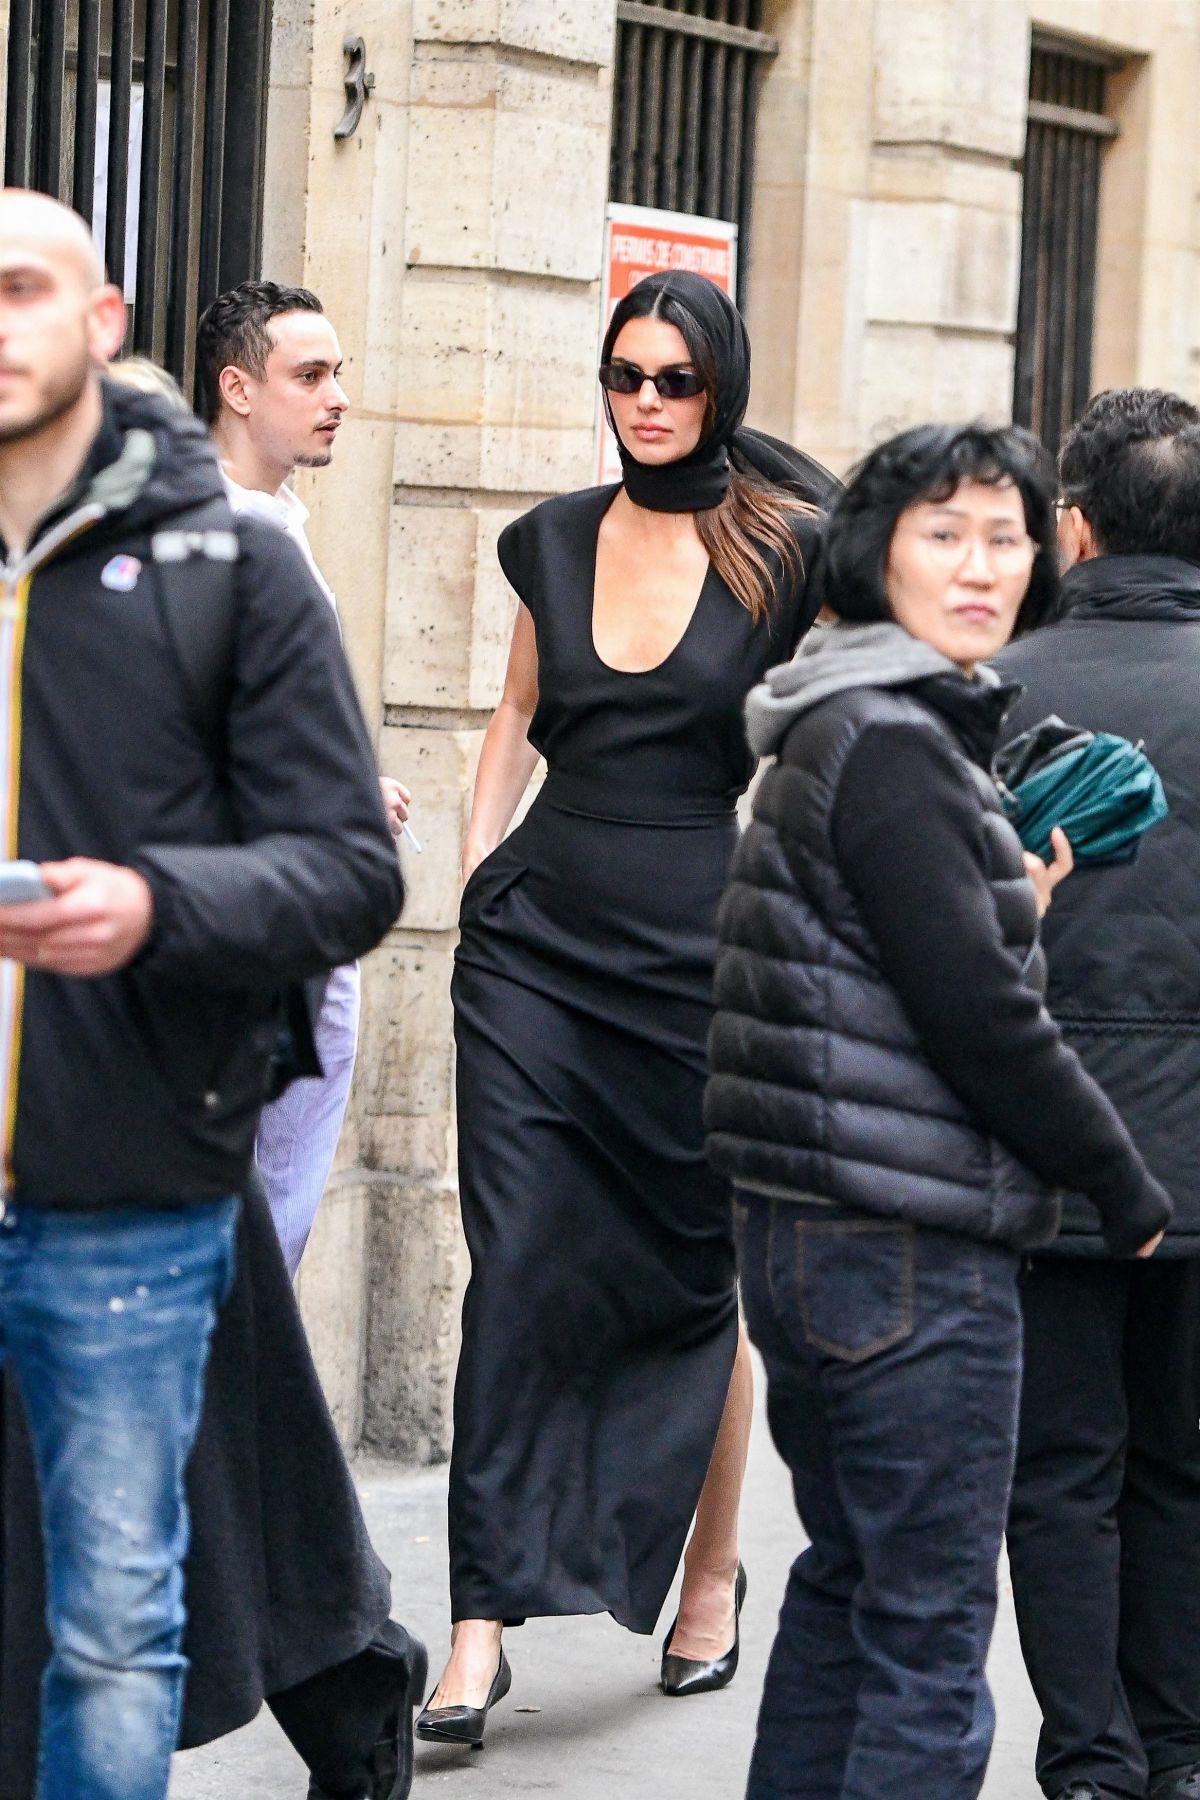 KENDALL JENNER at a Photoshoot in Paris 03/22/2023 – HawtCelebs